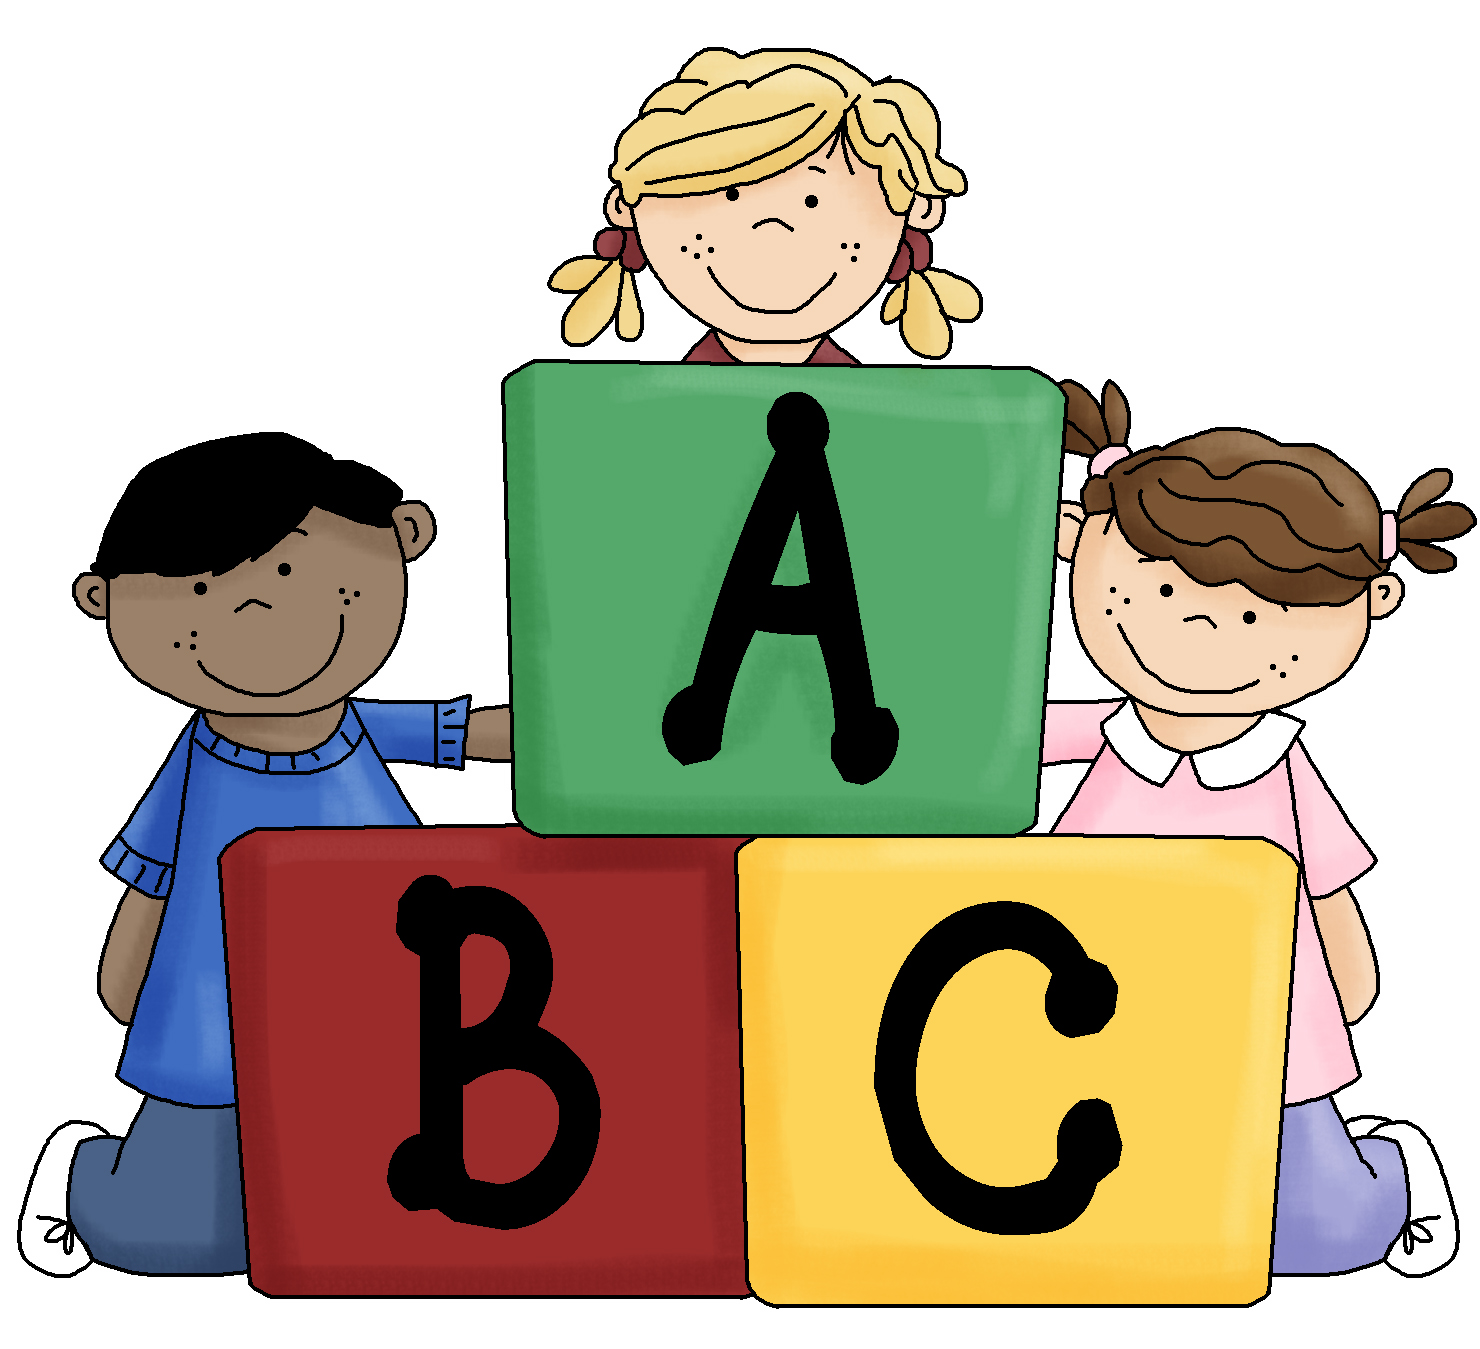 Free Abc Clipart, Download Free Clip Art, Free Clip Art on.